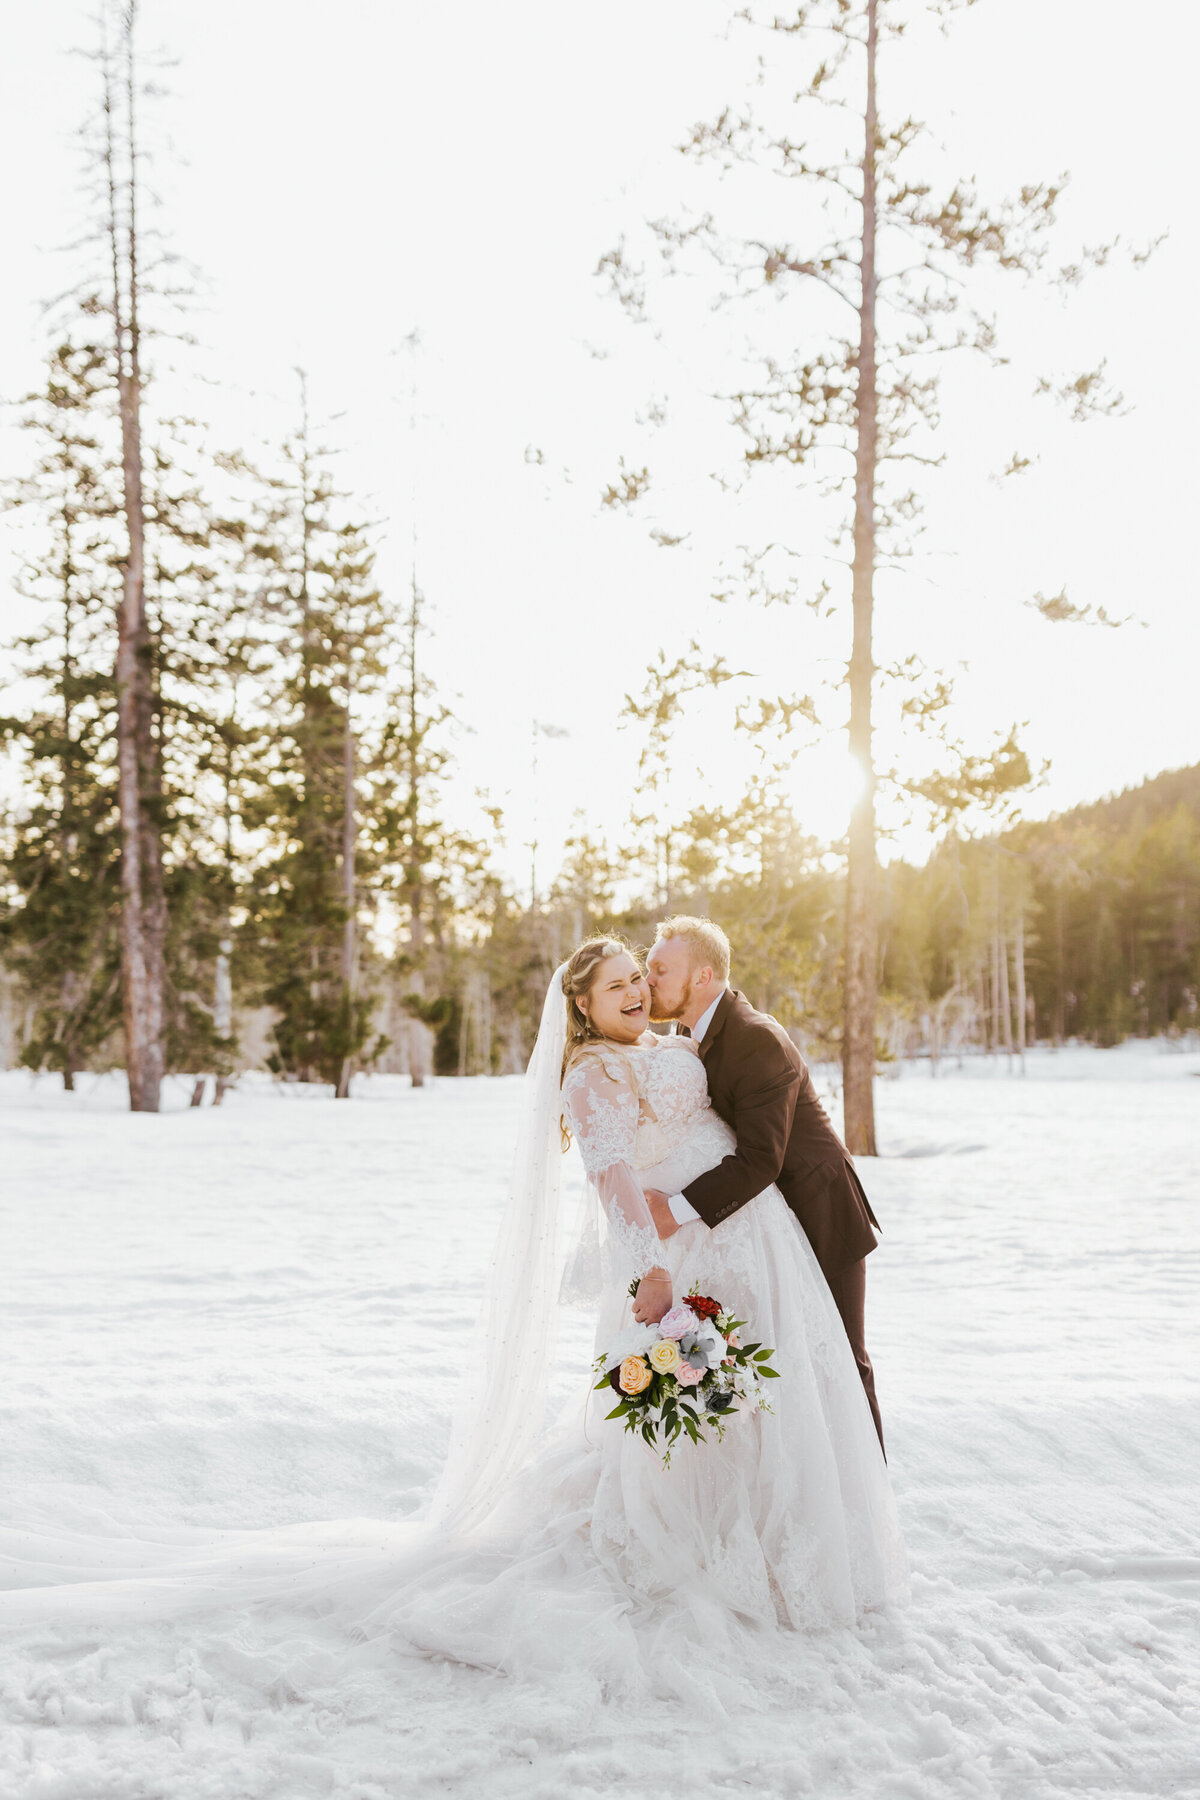 These bridal photos were so fun! This couple is a match made in heaven and their bridal photos in the pine trees of Emigration Canyon, Idaho was the perfect backdrop.